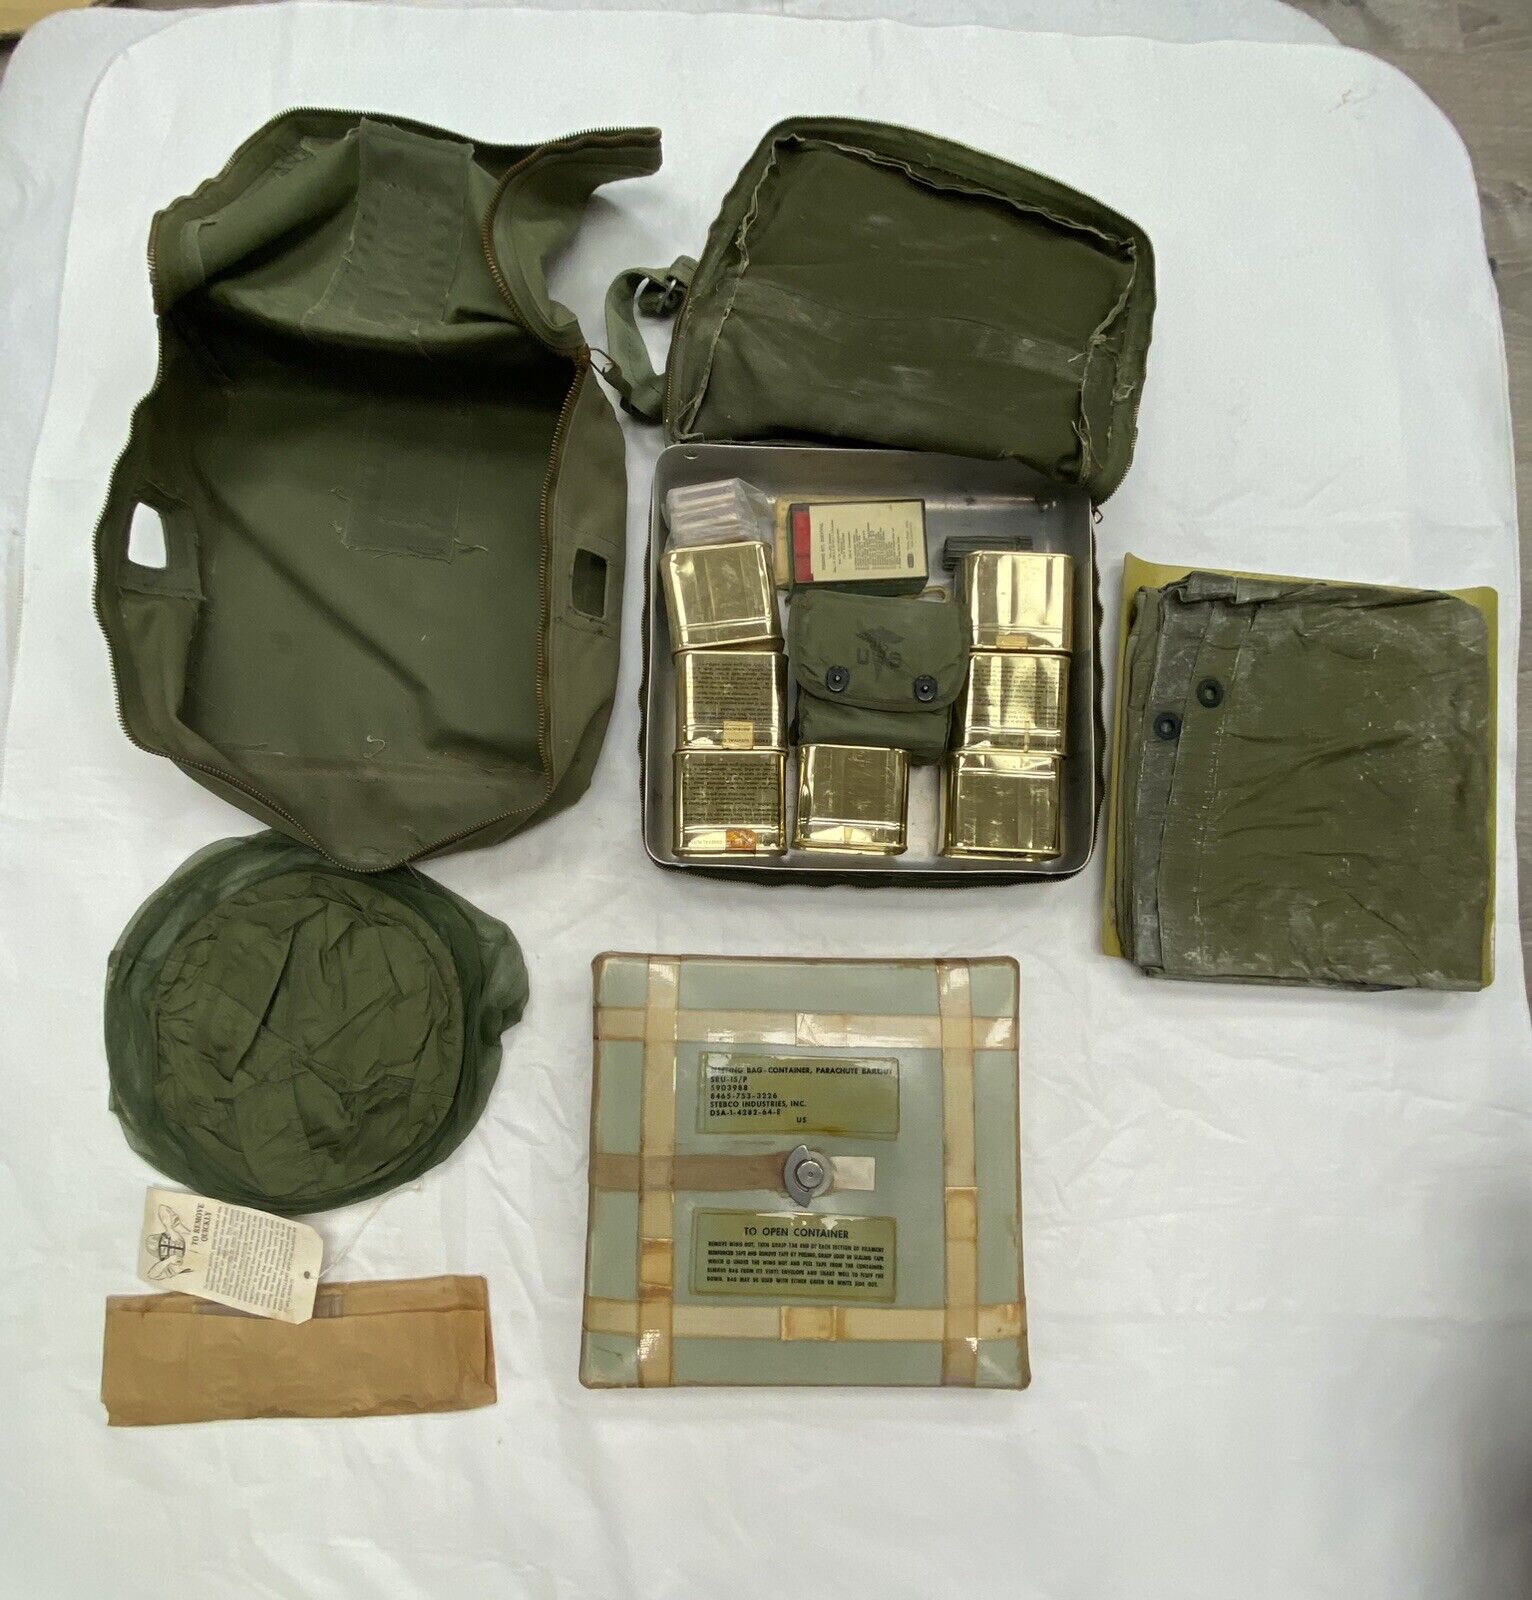 1964 US Air Force Cold Climate Survival Kit